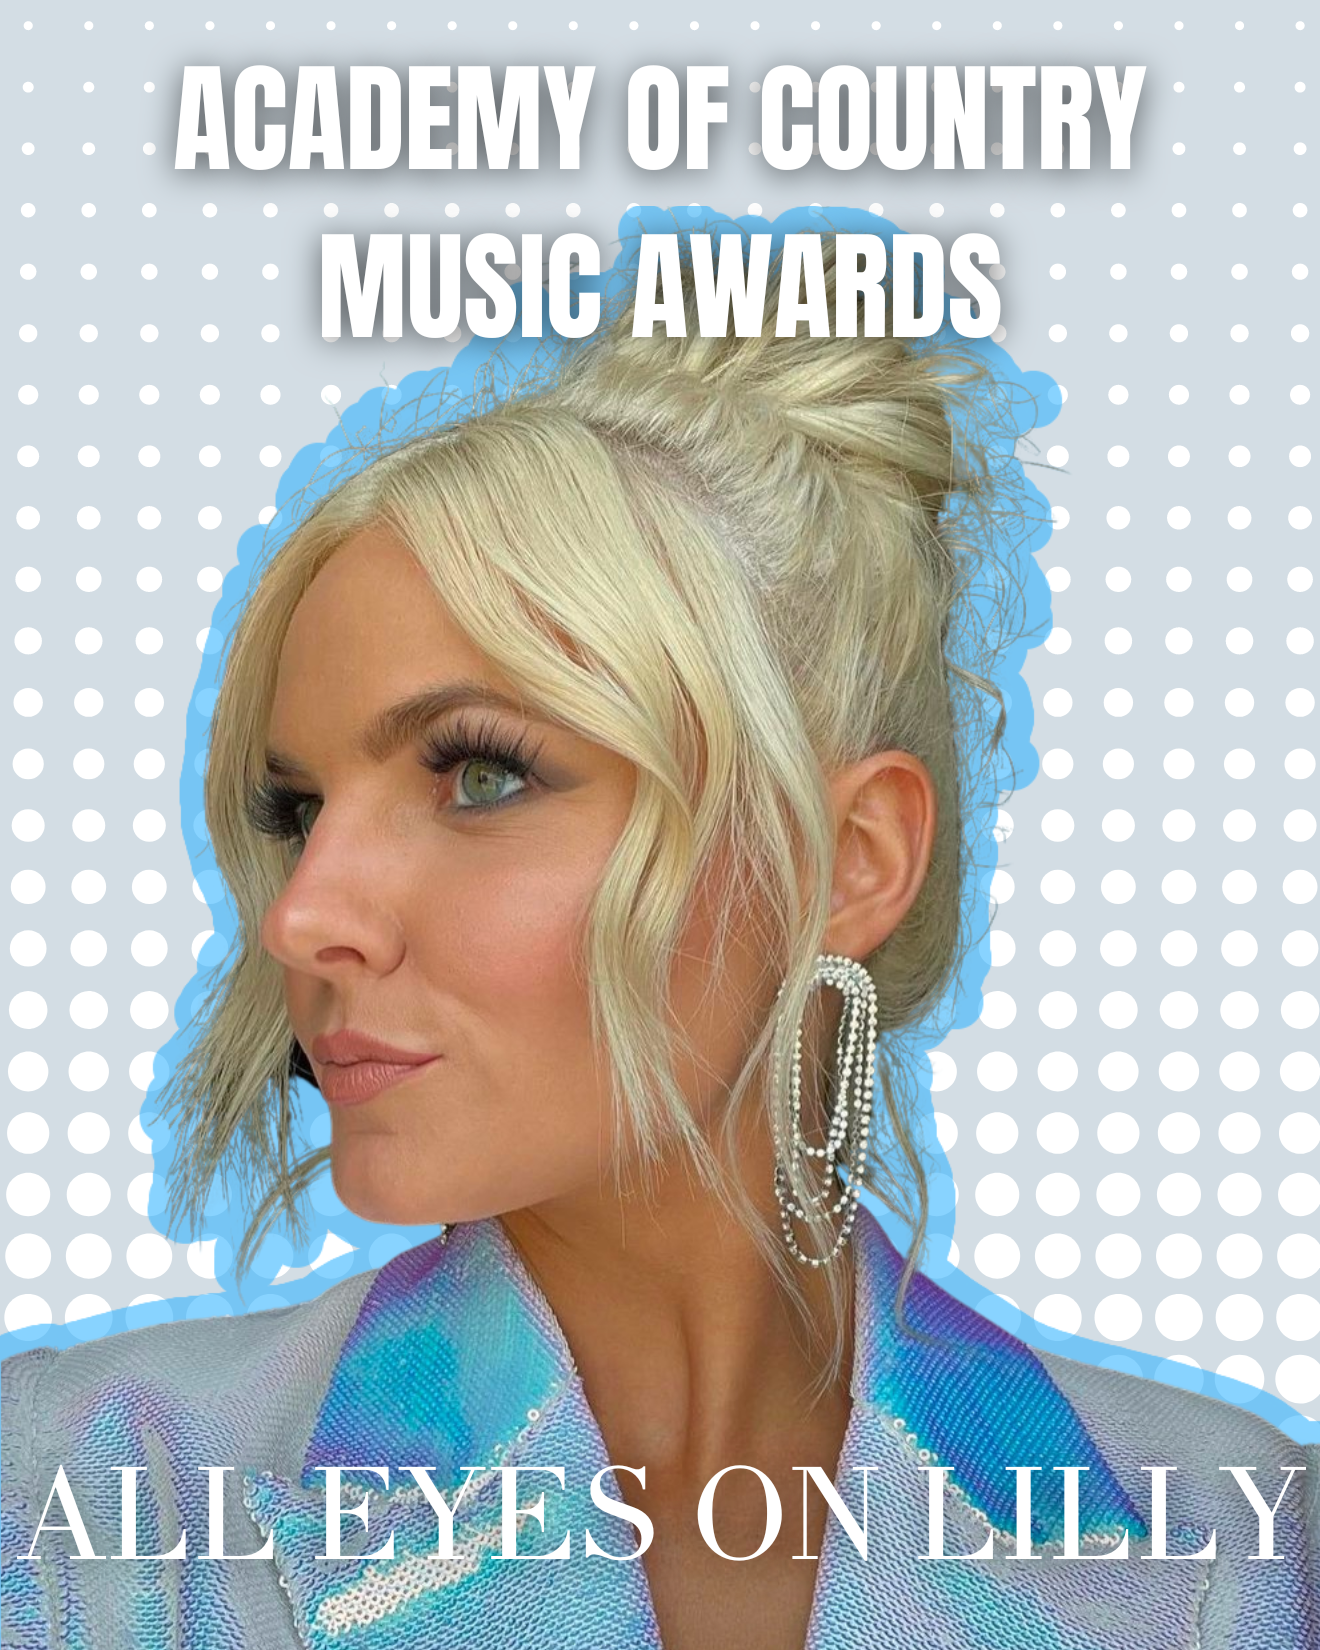 All Eyes on Lilly Lashes at the Academy of Country Music Awards!